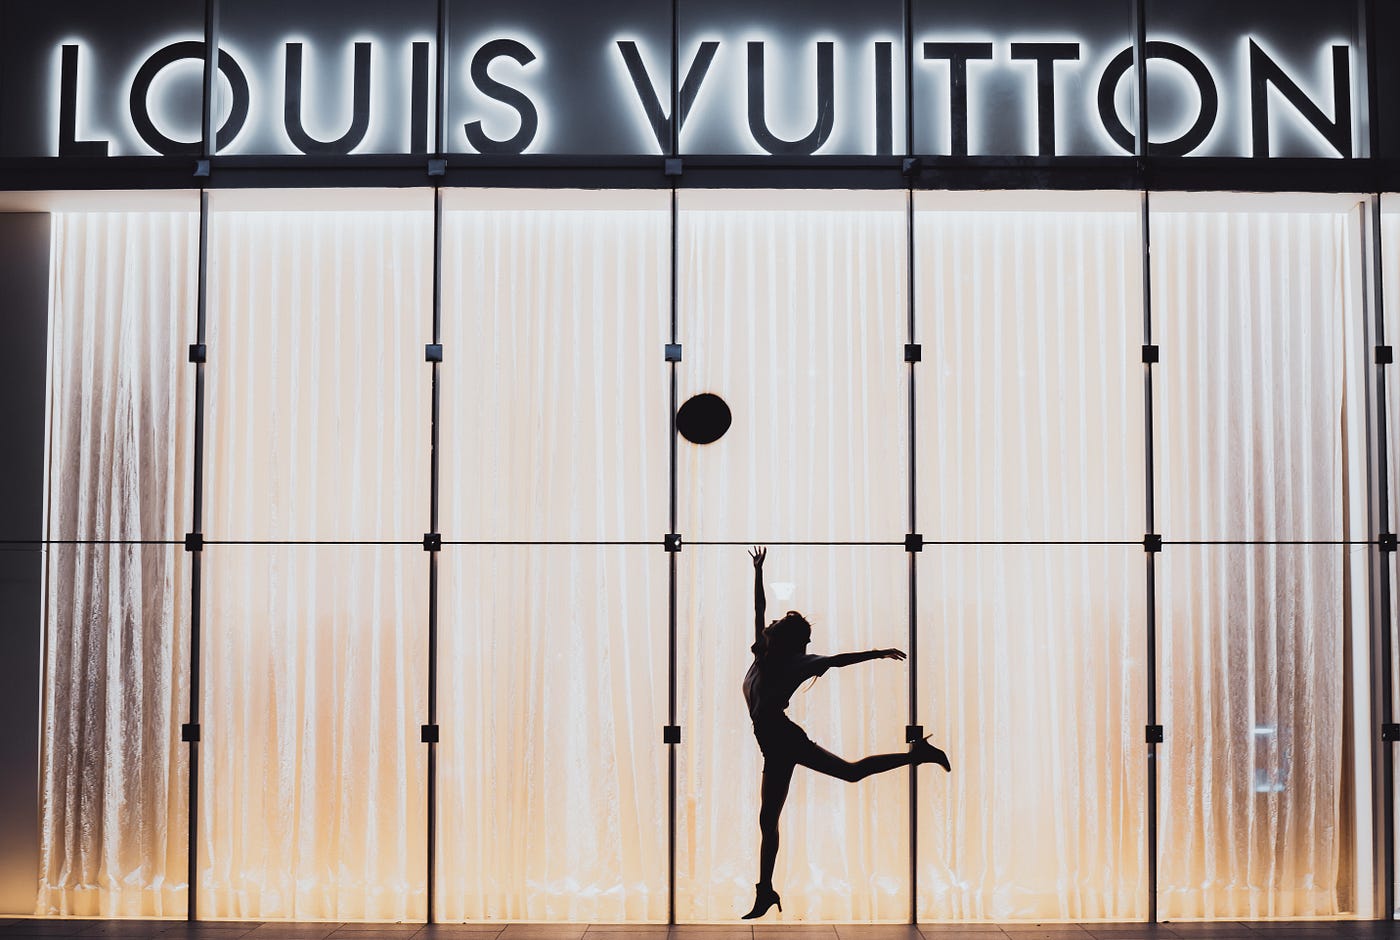 Louis Vuitton is world's one of the most valuable iconic luxury brands